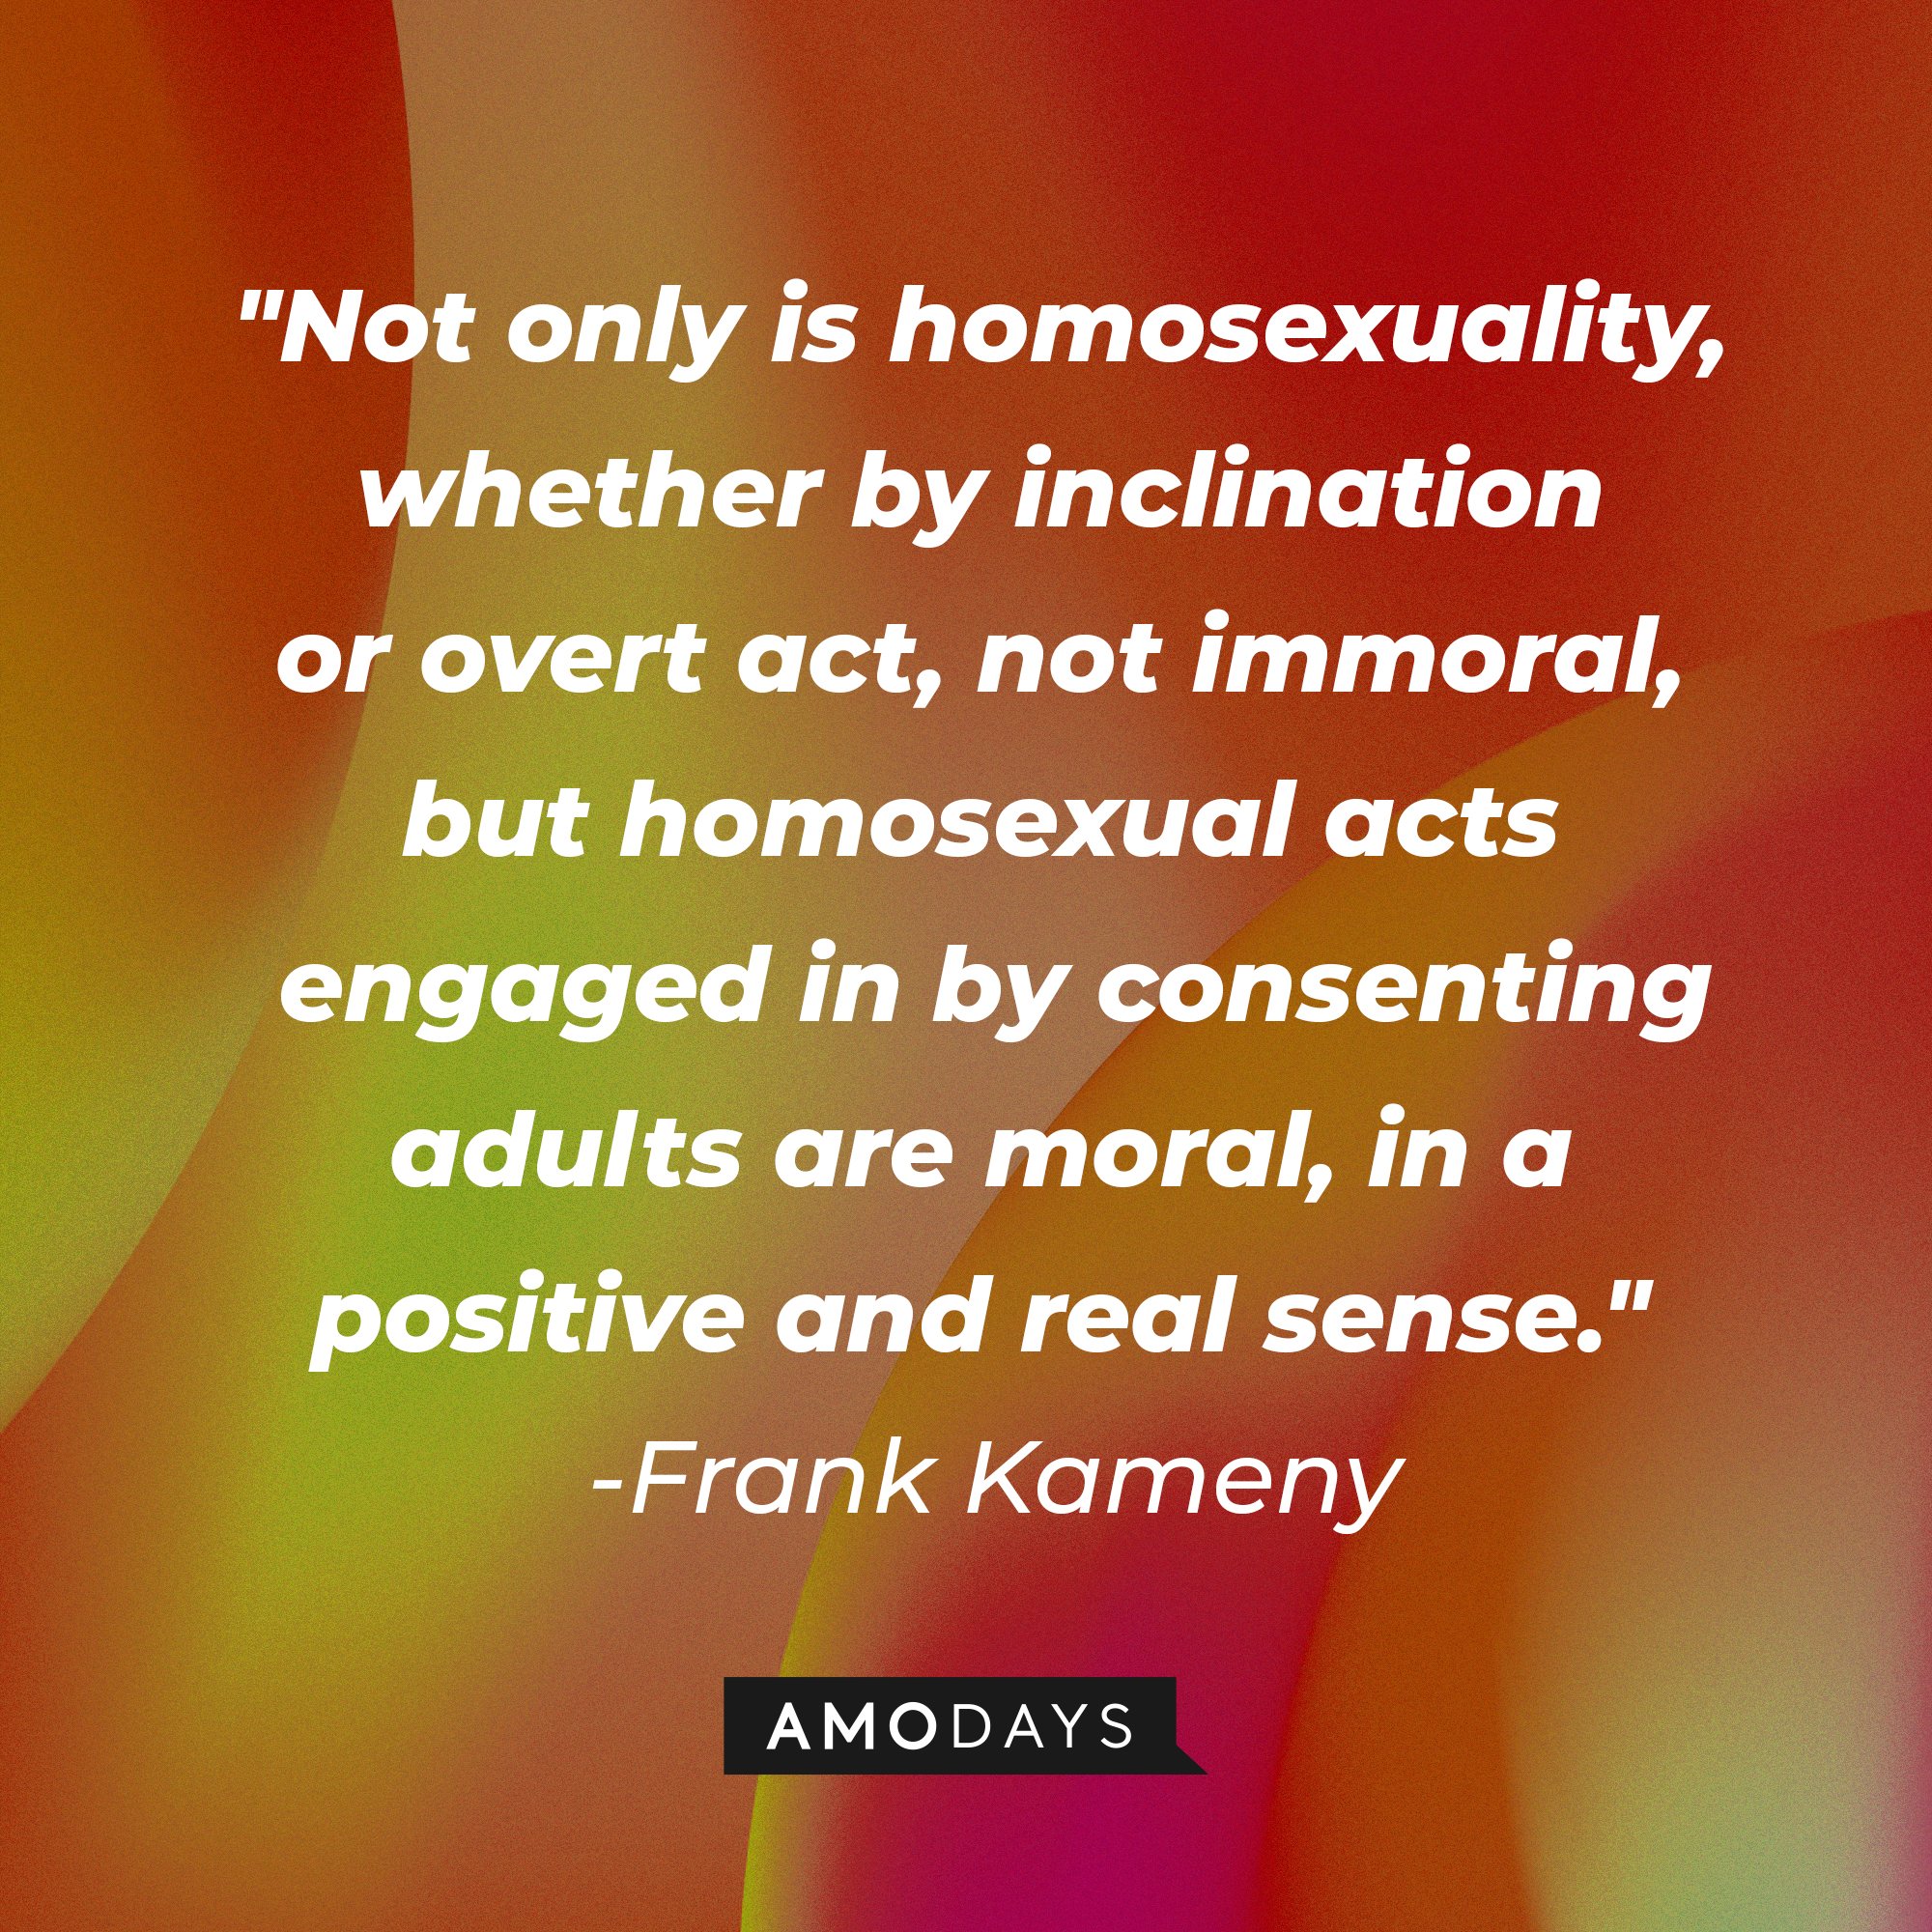 Frank Kameny's quote: "Not only is homosexuality, whether by inclination or overt act, not immoral, but homosexual acts engaged in by consenting adults are moral, in a positive and real sense." | Image: AmoDays